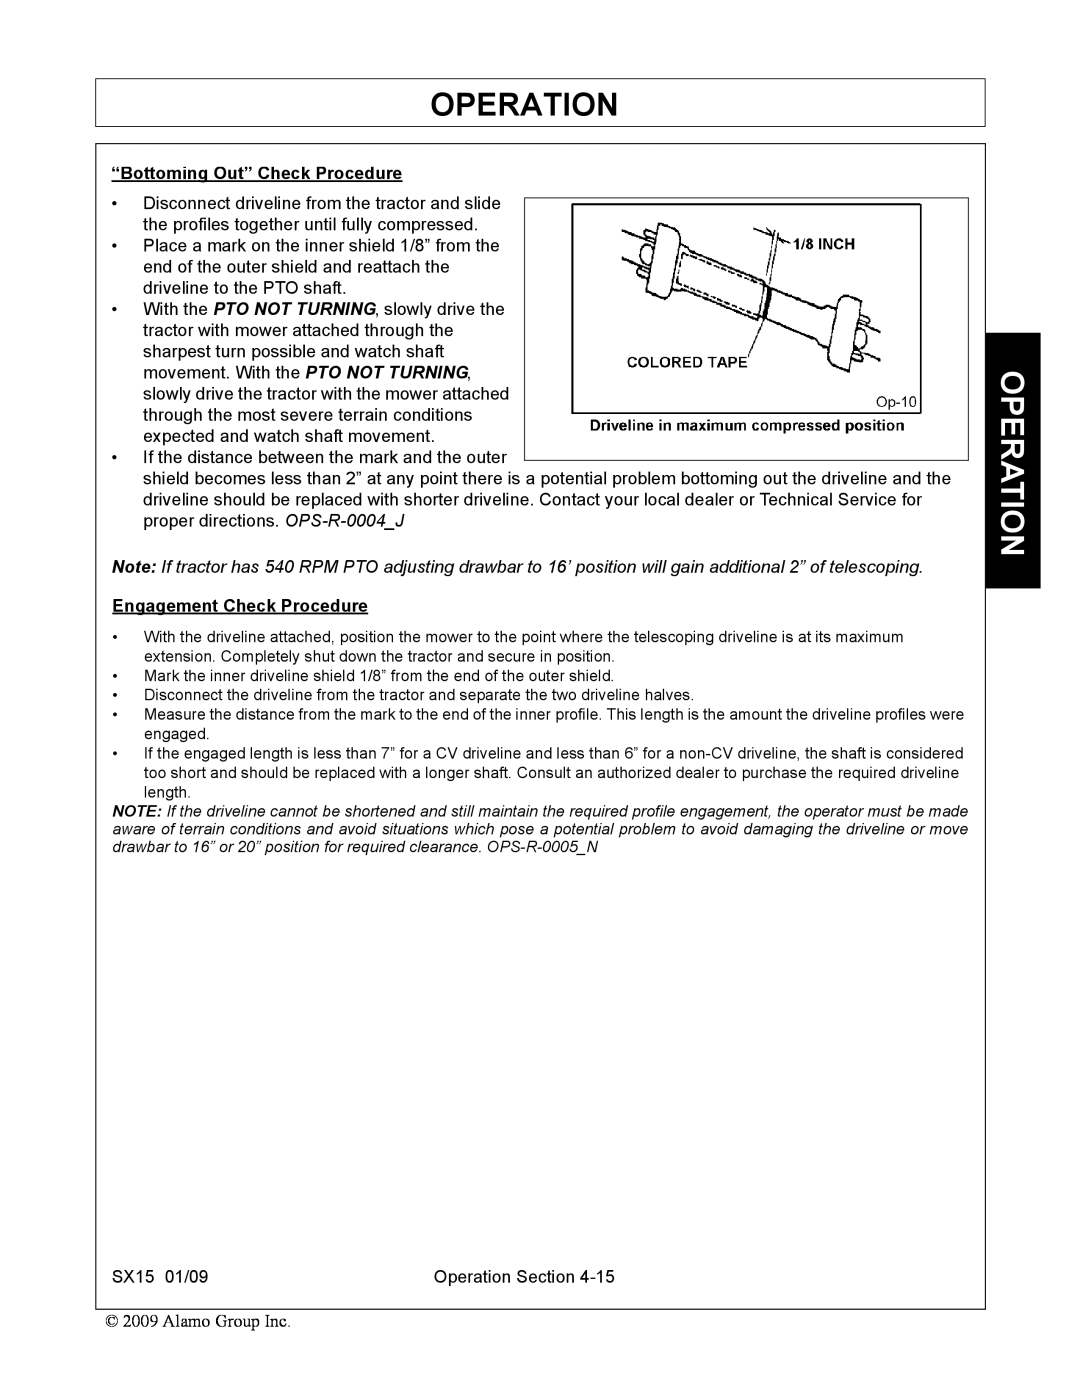 Alamo SX15 manual Operation, “Bottoming Out” Check Procedure, Engagement Check Procedure 